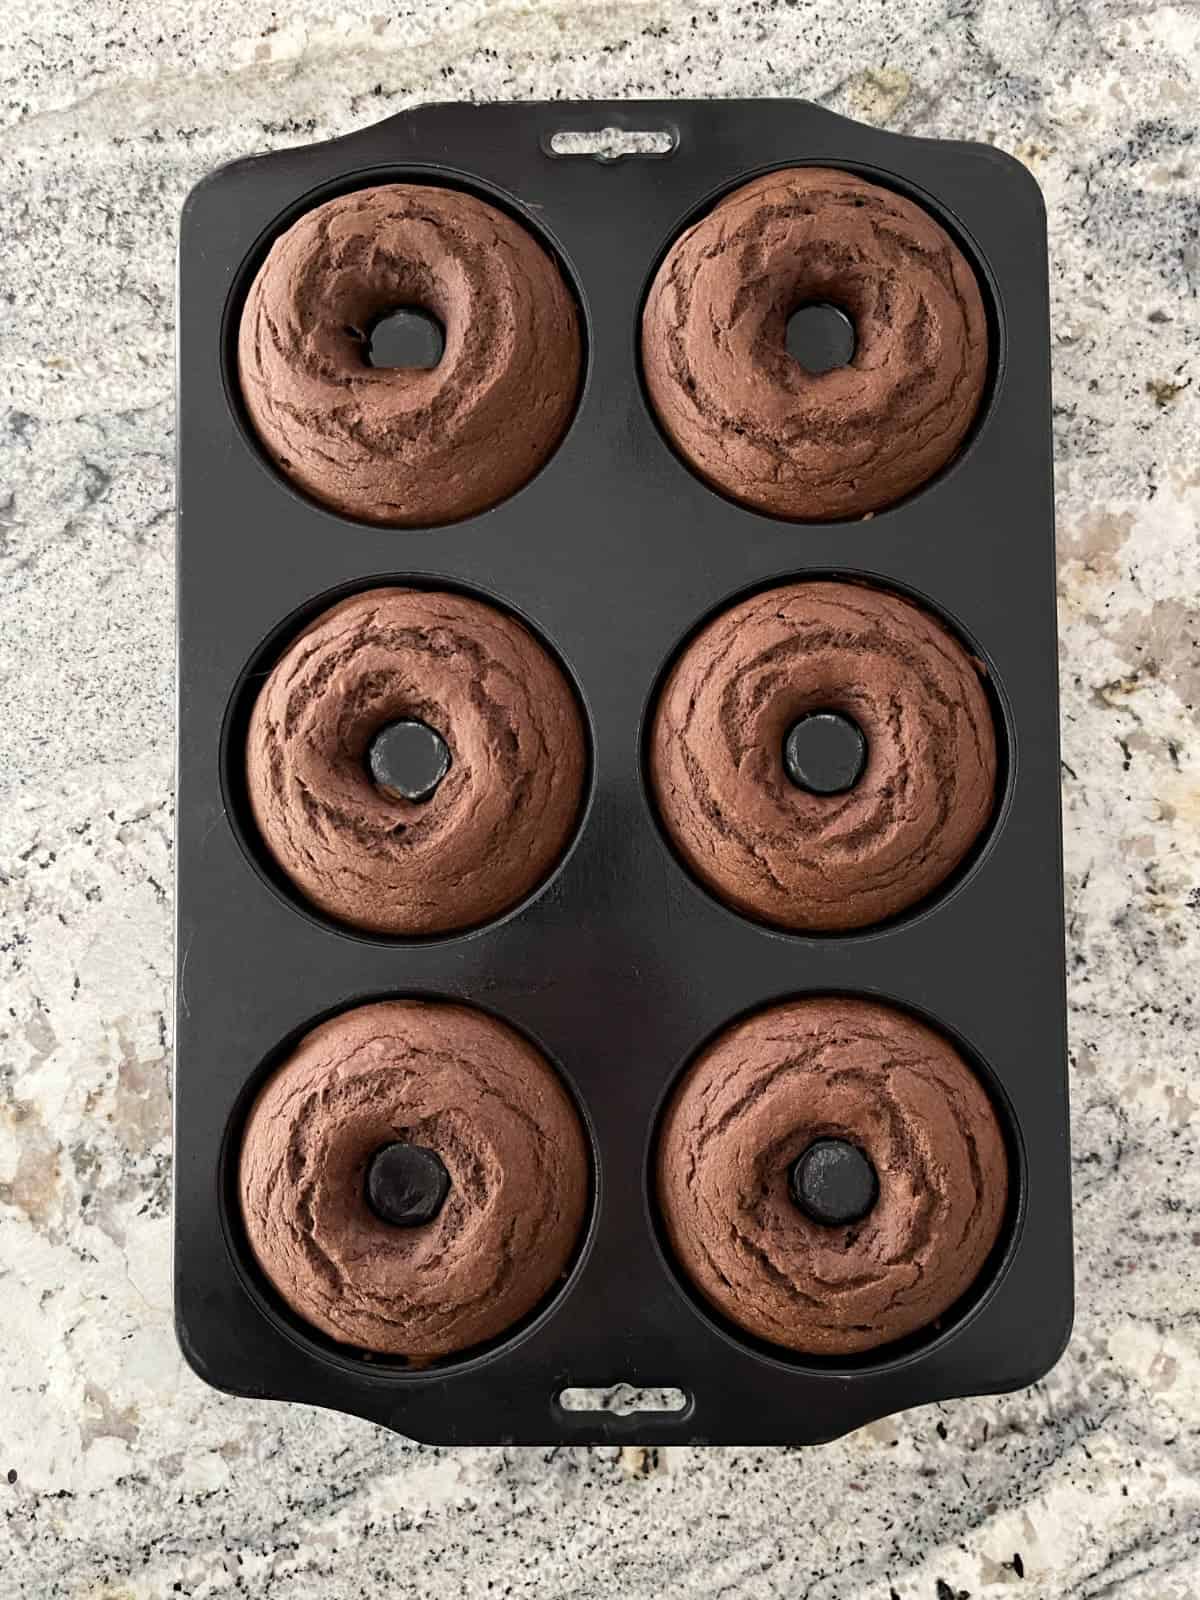 Baked mint chocolate donuts in pan on granite counter.